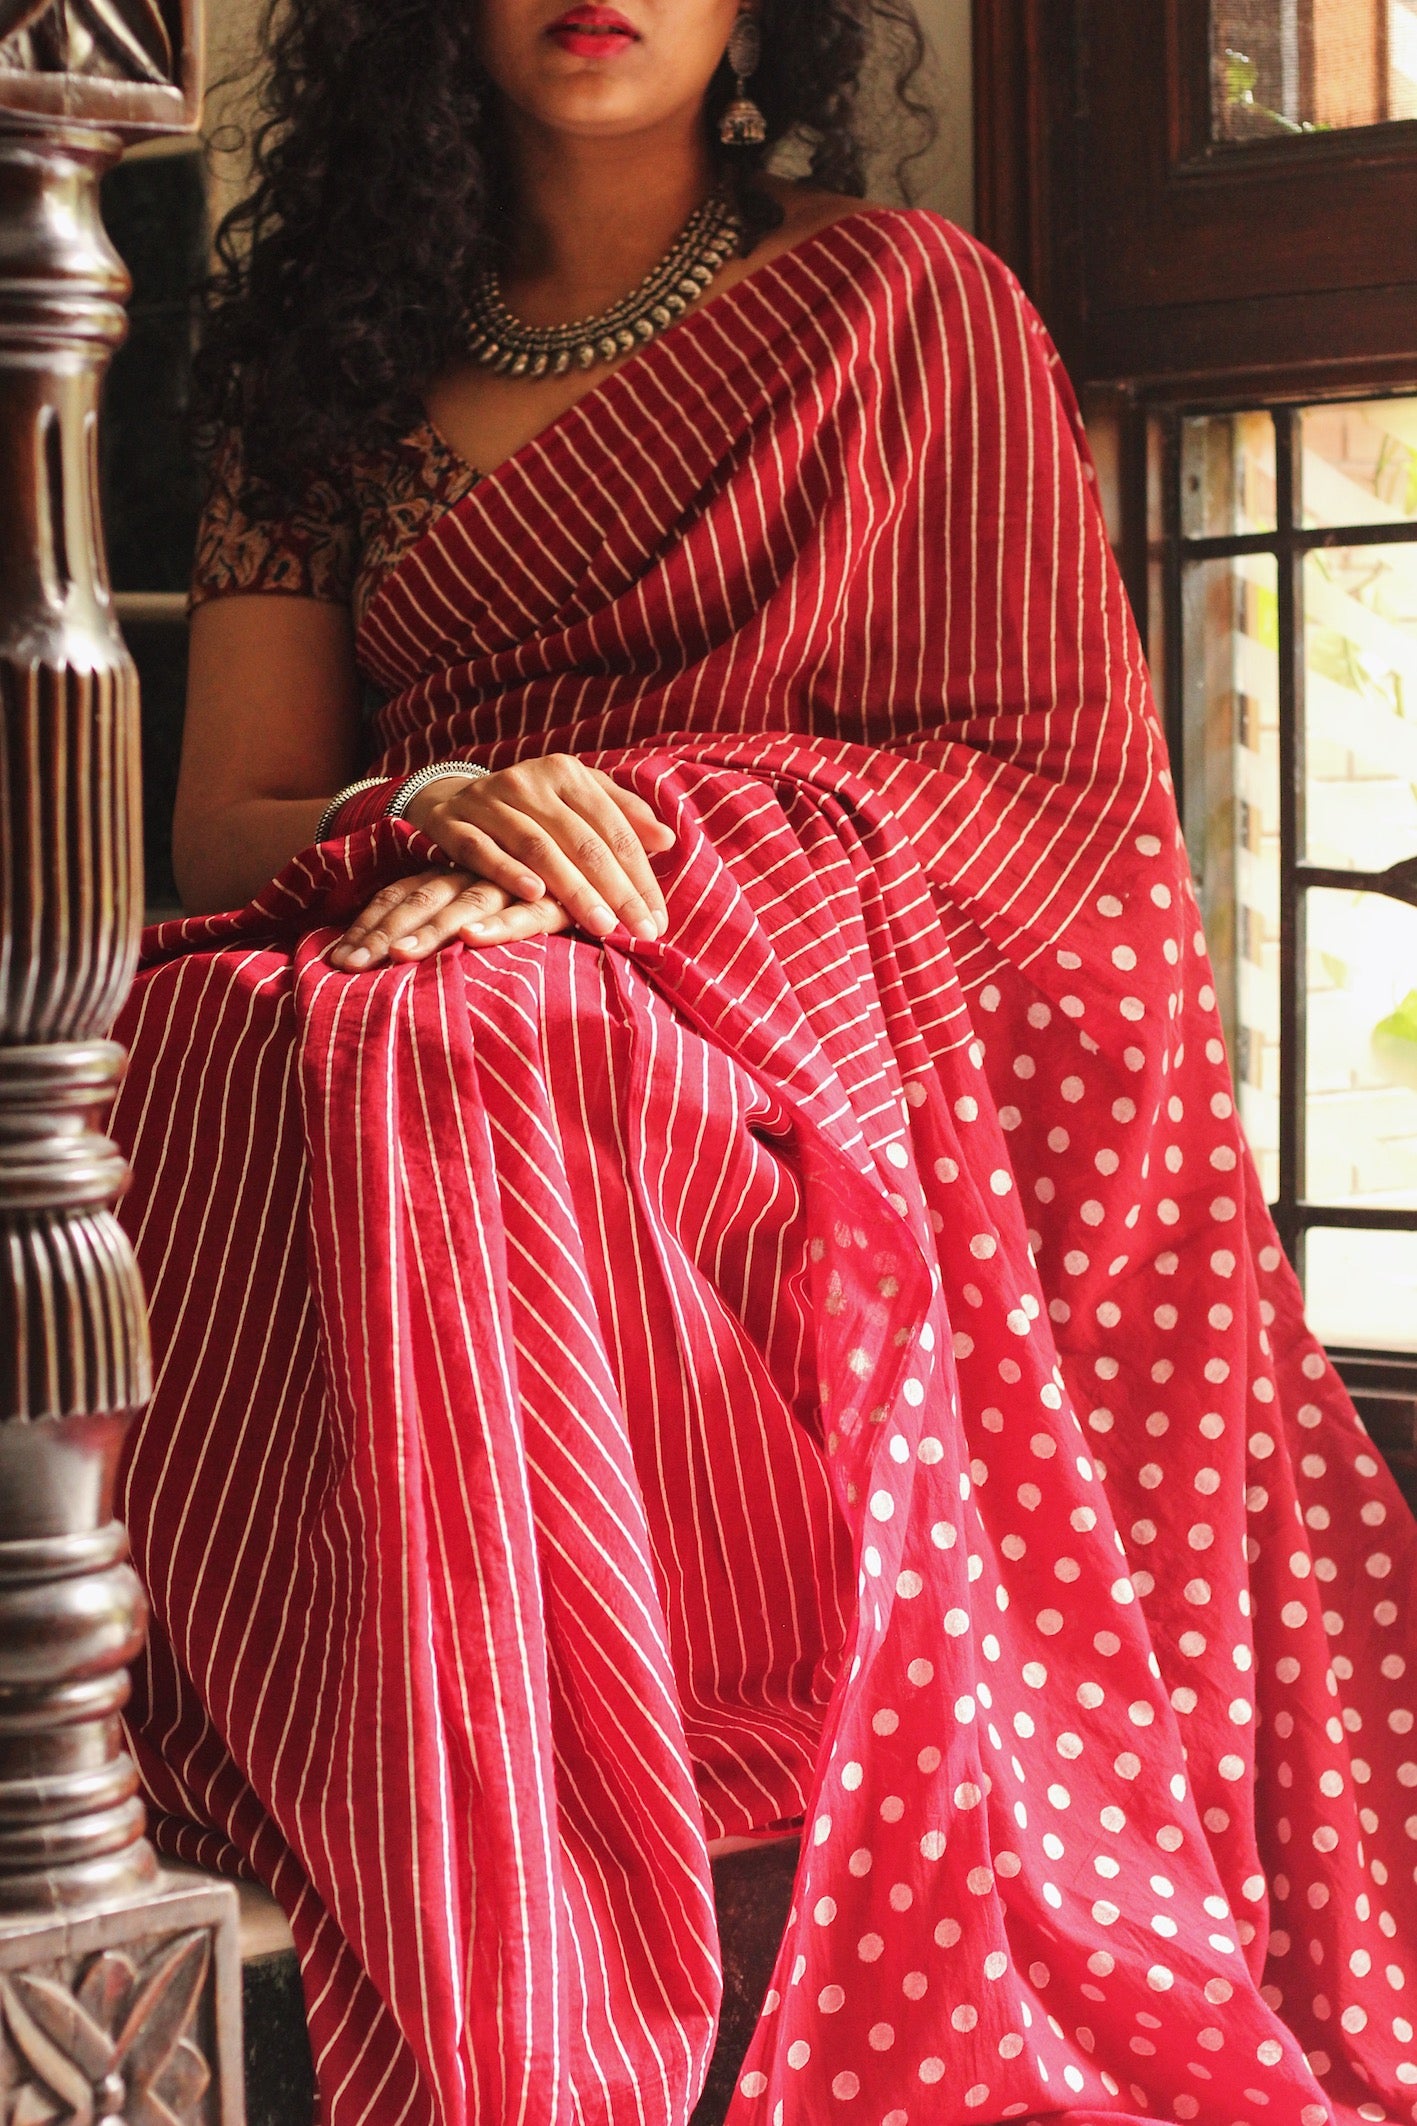 Handcrafted Mulmul Cotton Saree Hand Block Printed Comes with Blouse Piece Free Shipping Pan India